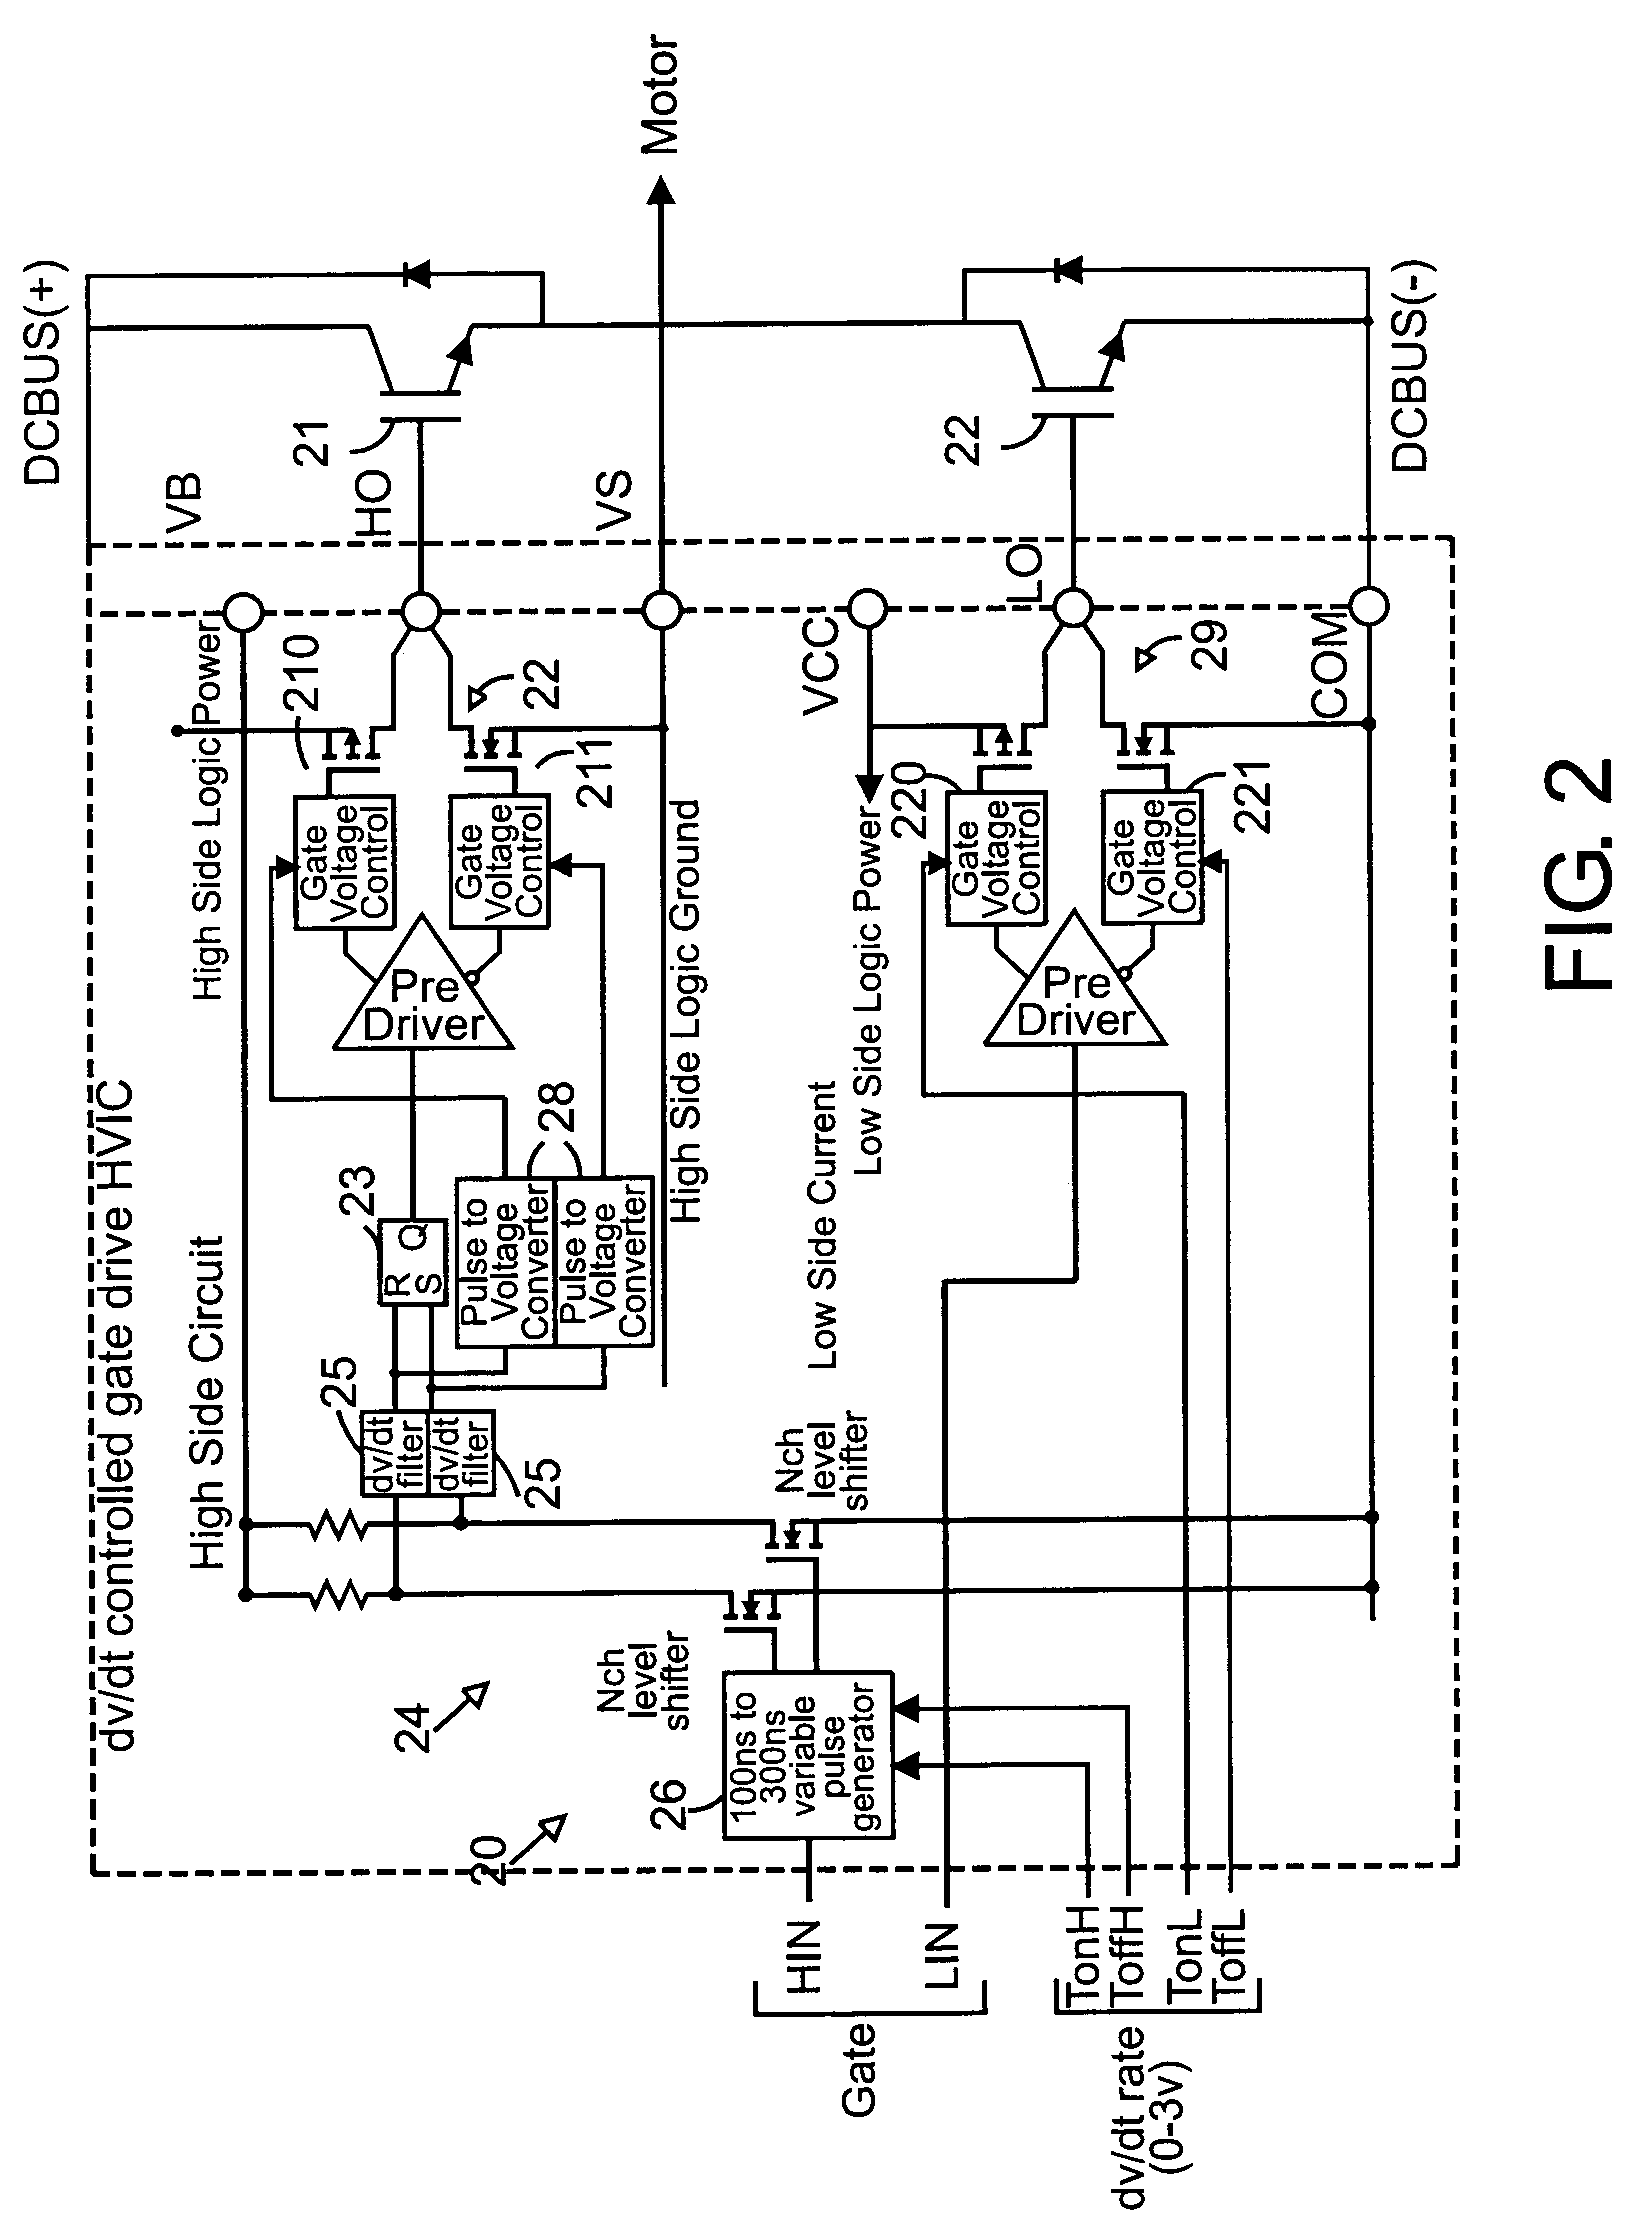 Global closed loop control system with dv/dt control and EMI/switching loss reduction